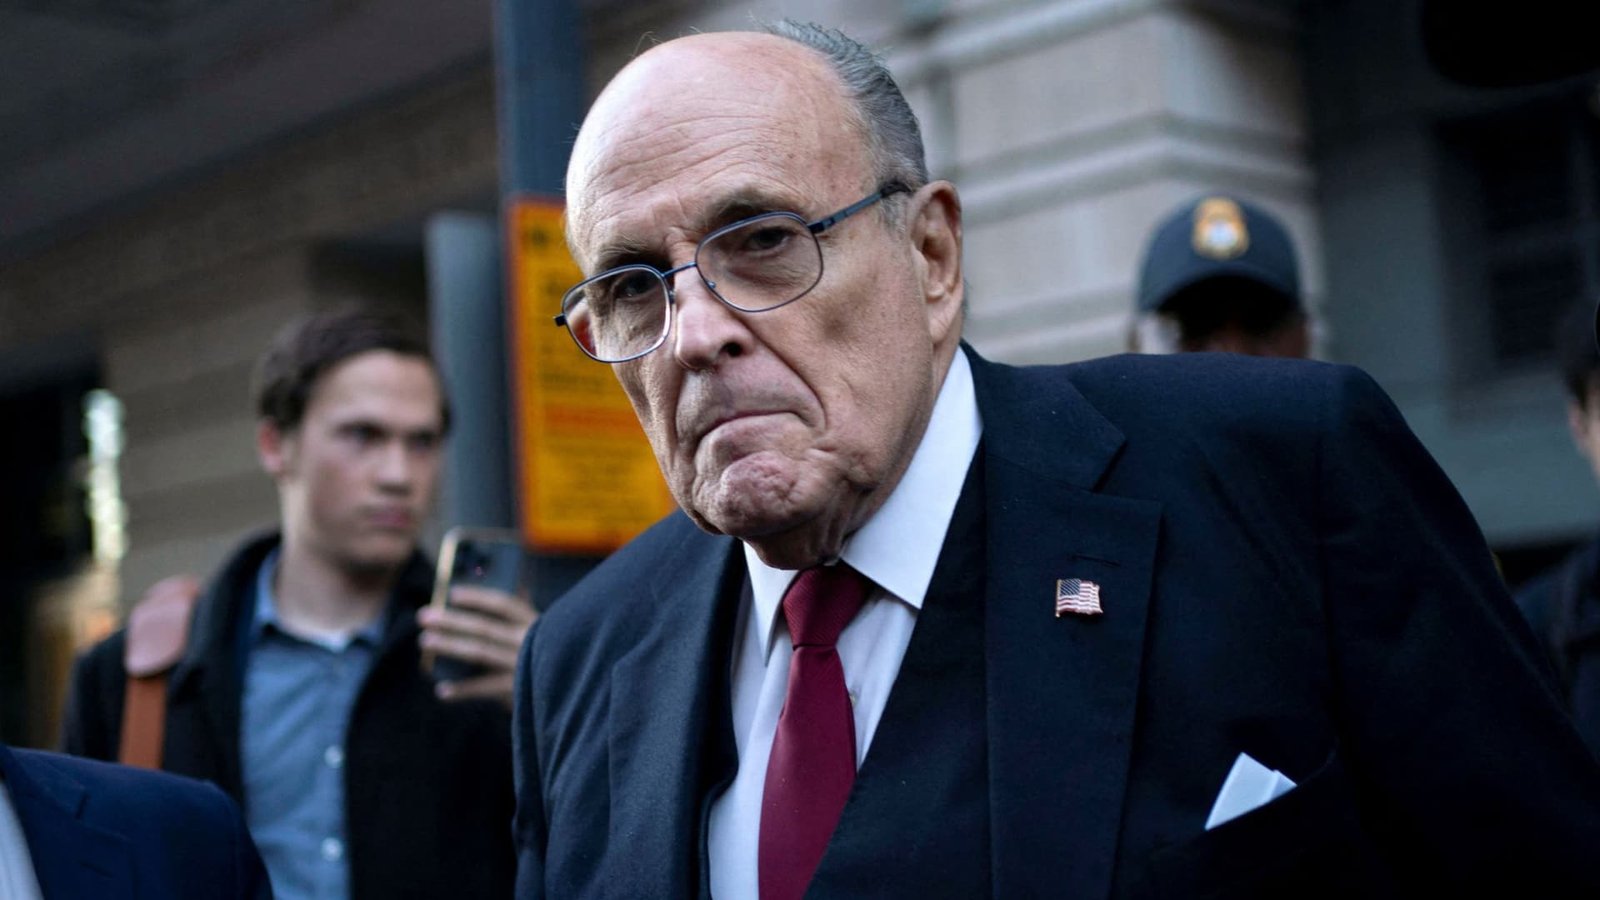 D.C. ethics board recommends Rudy Giuliani be disbarred